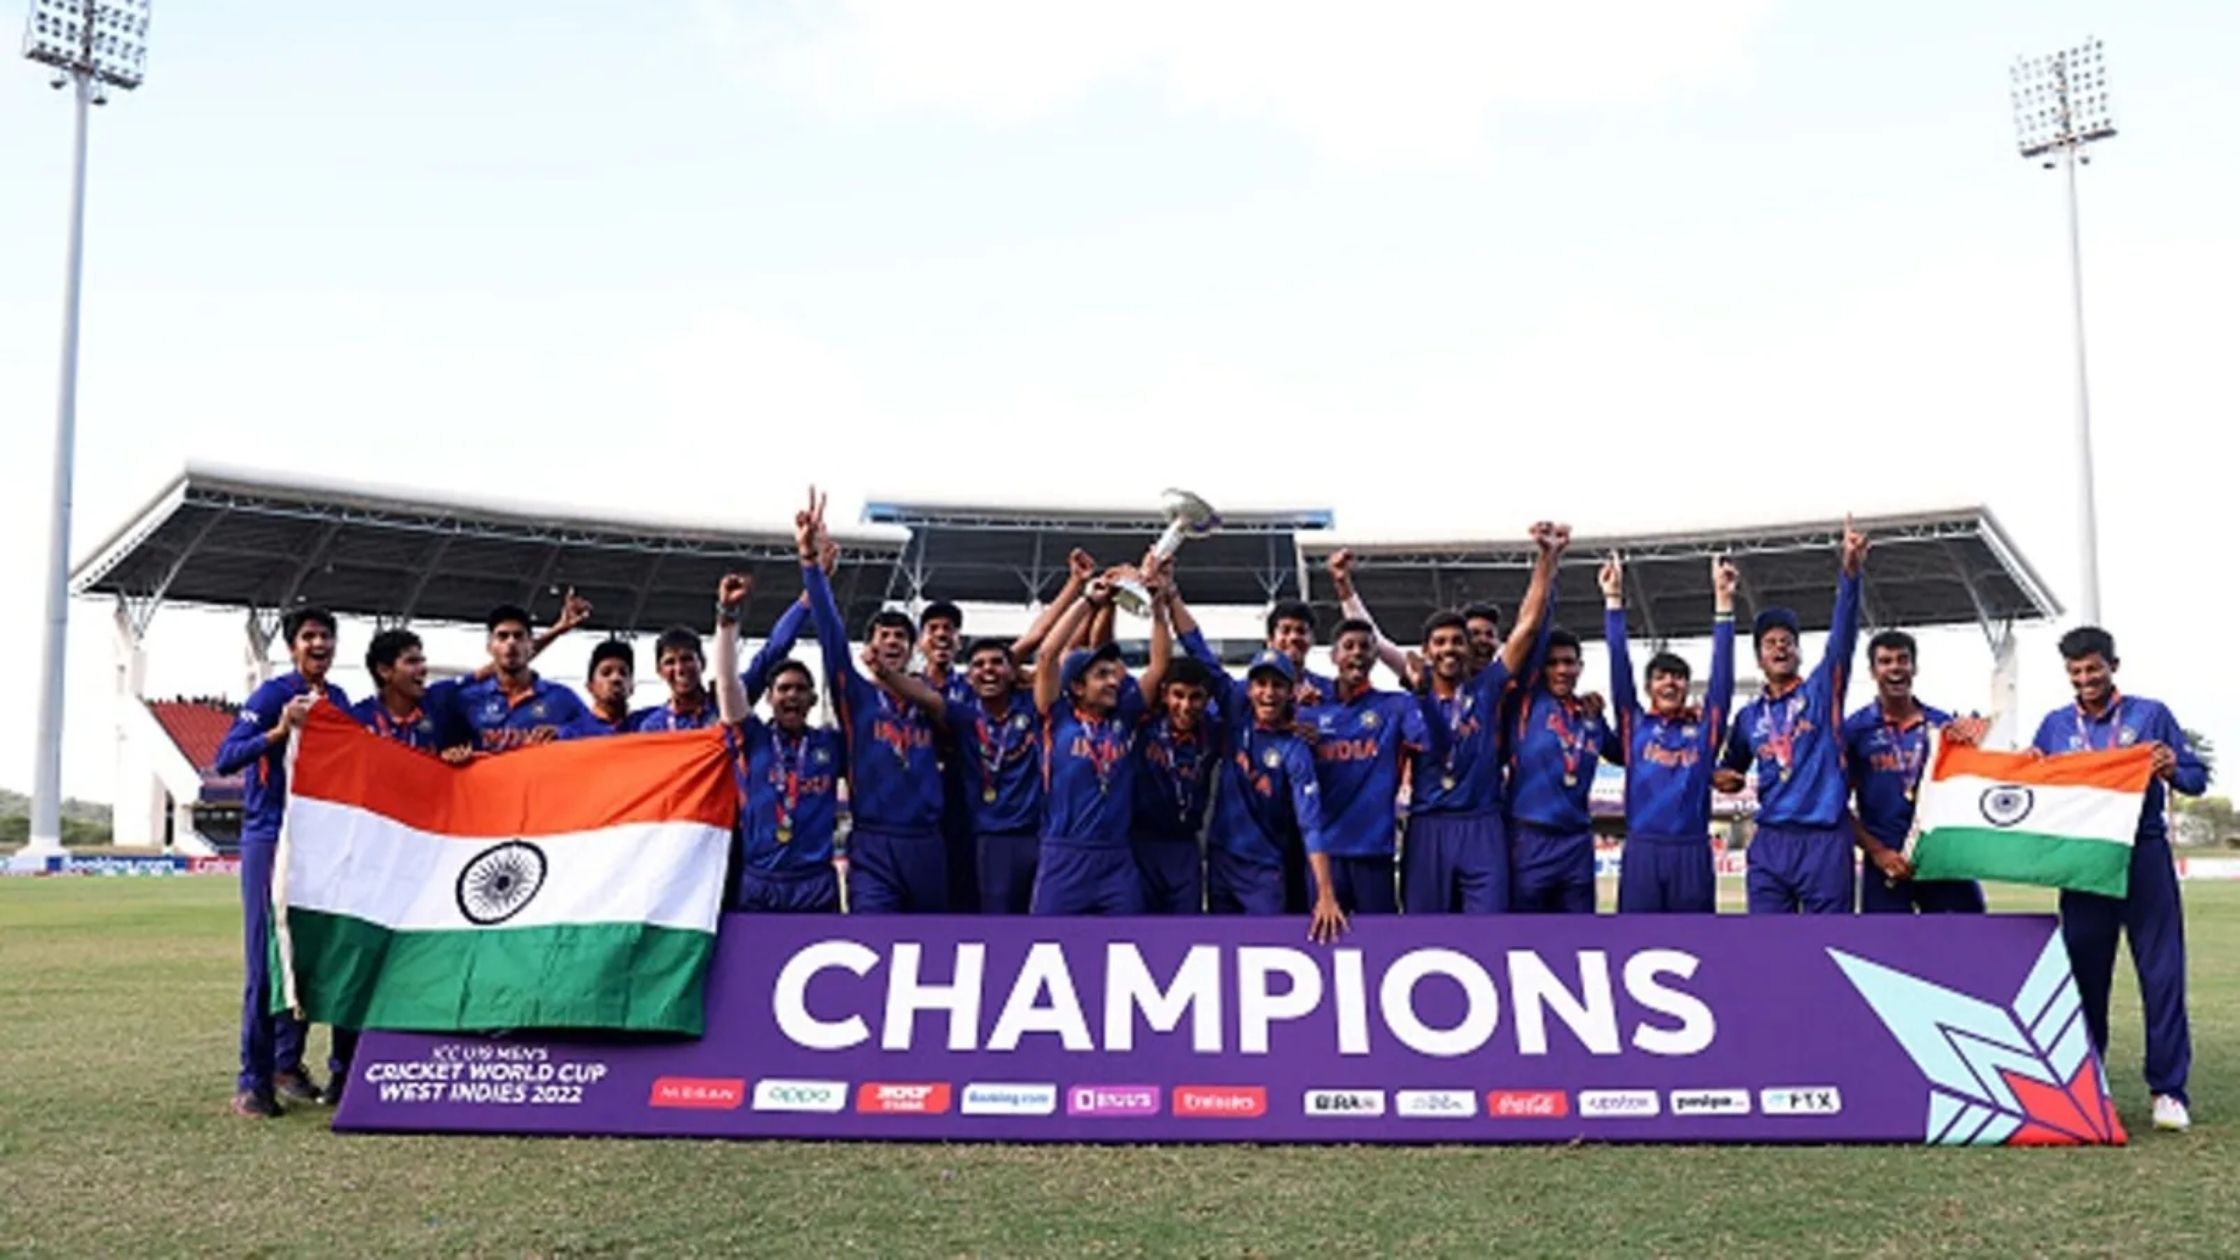 India became champion for the 5th time u19 worldcup